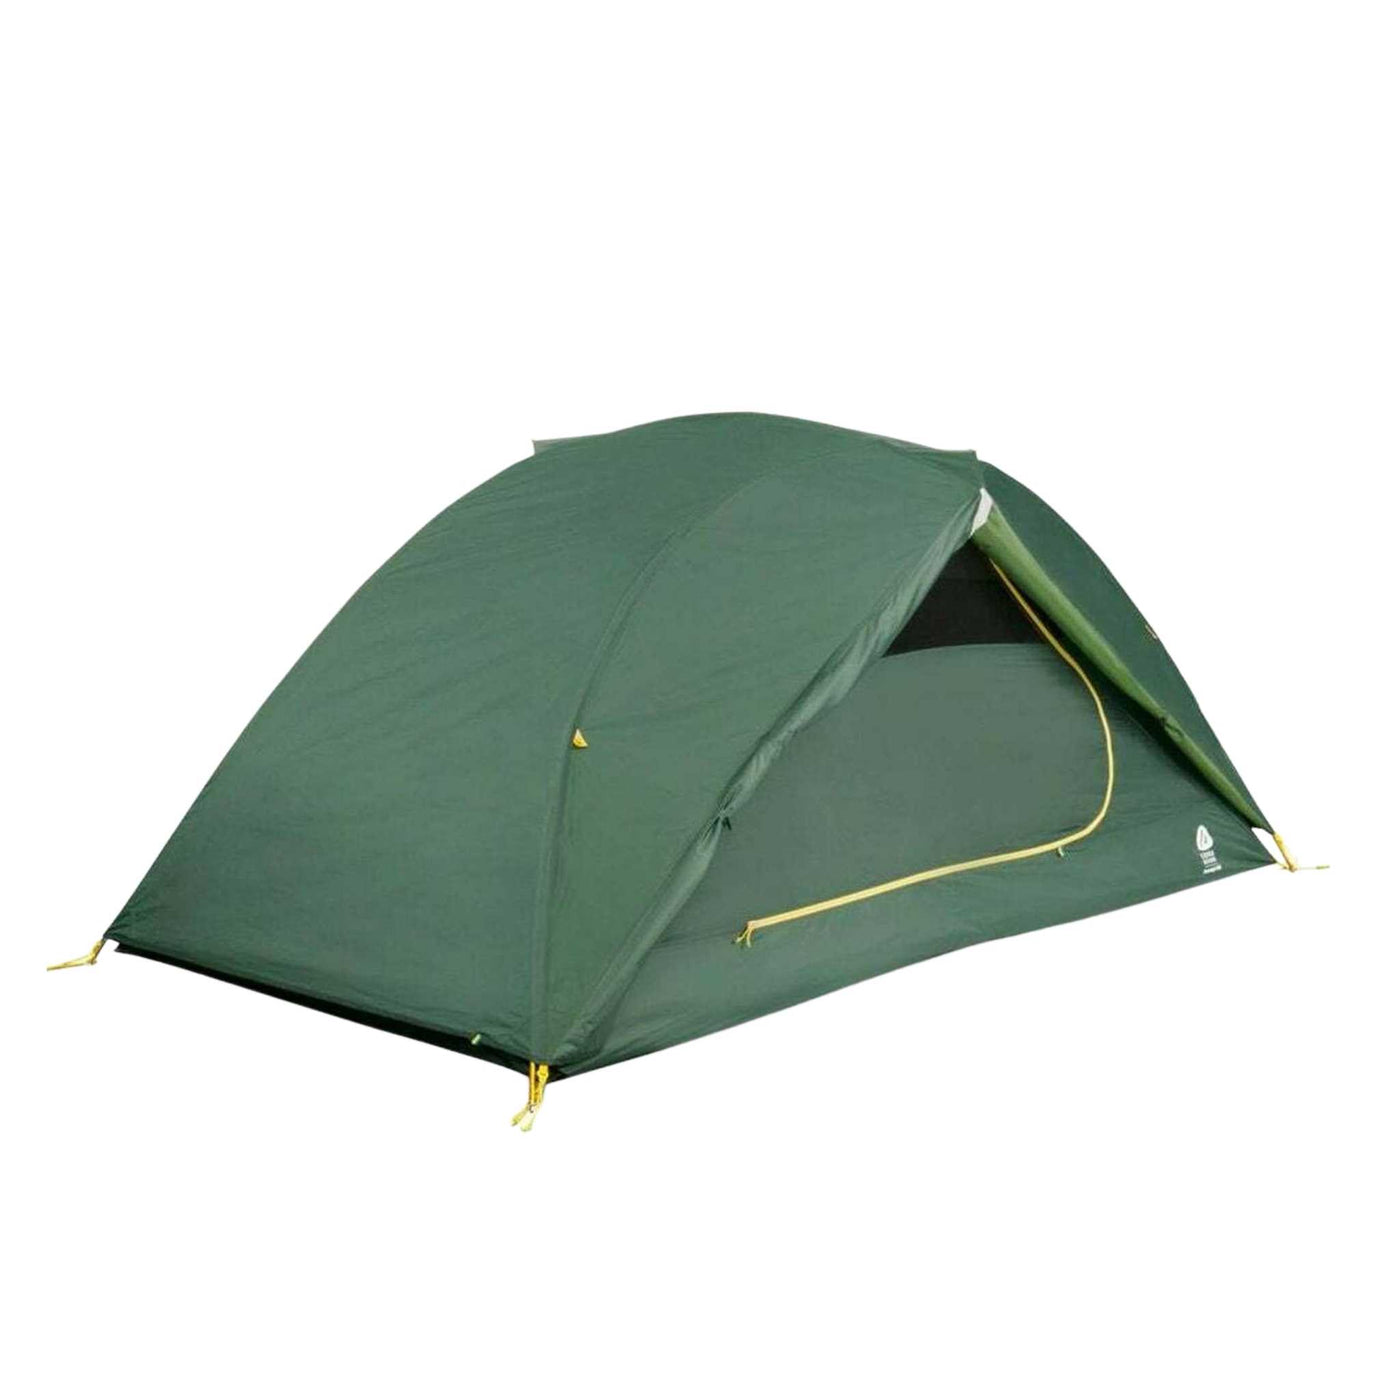 Sierra Designs Clearwing 3000 2 Person Tent | Tramping 2 Person Backpacking Tent | Further Faster Christchurch NZ #green-sd